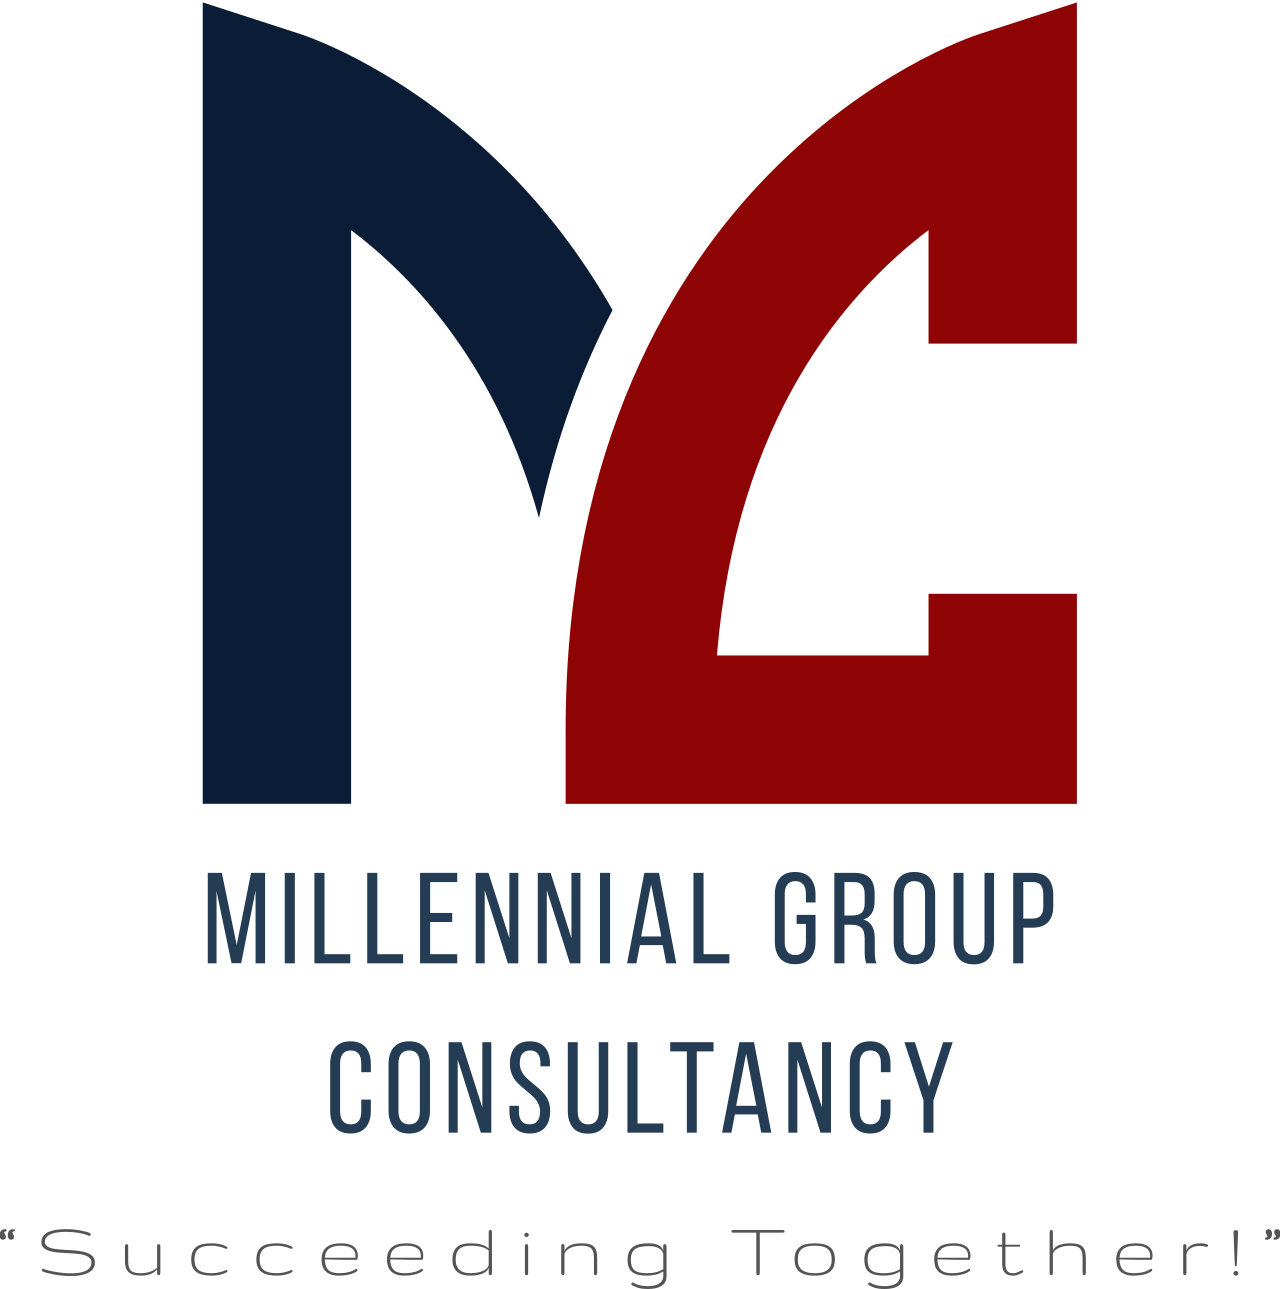 Millennial Group
Consultancy's web page